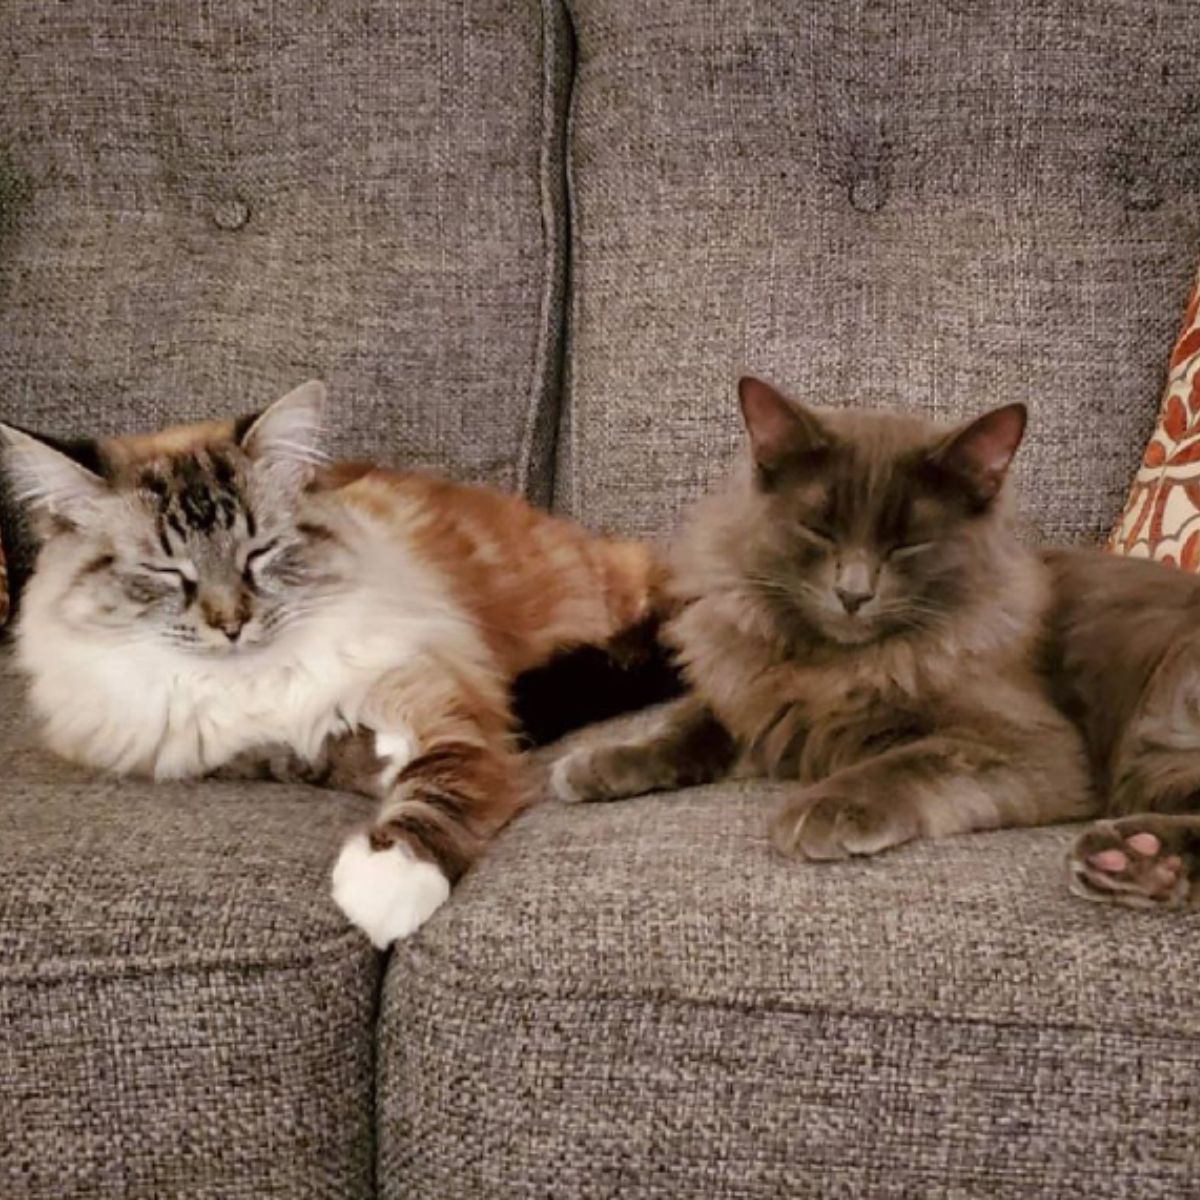 cats on the couch